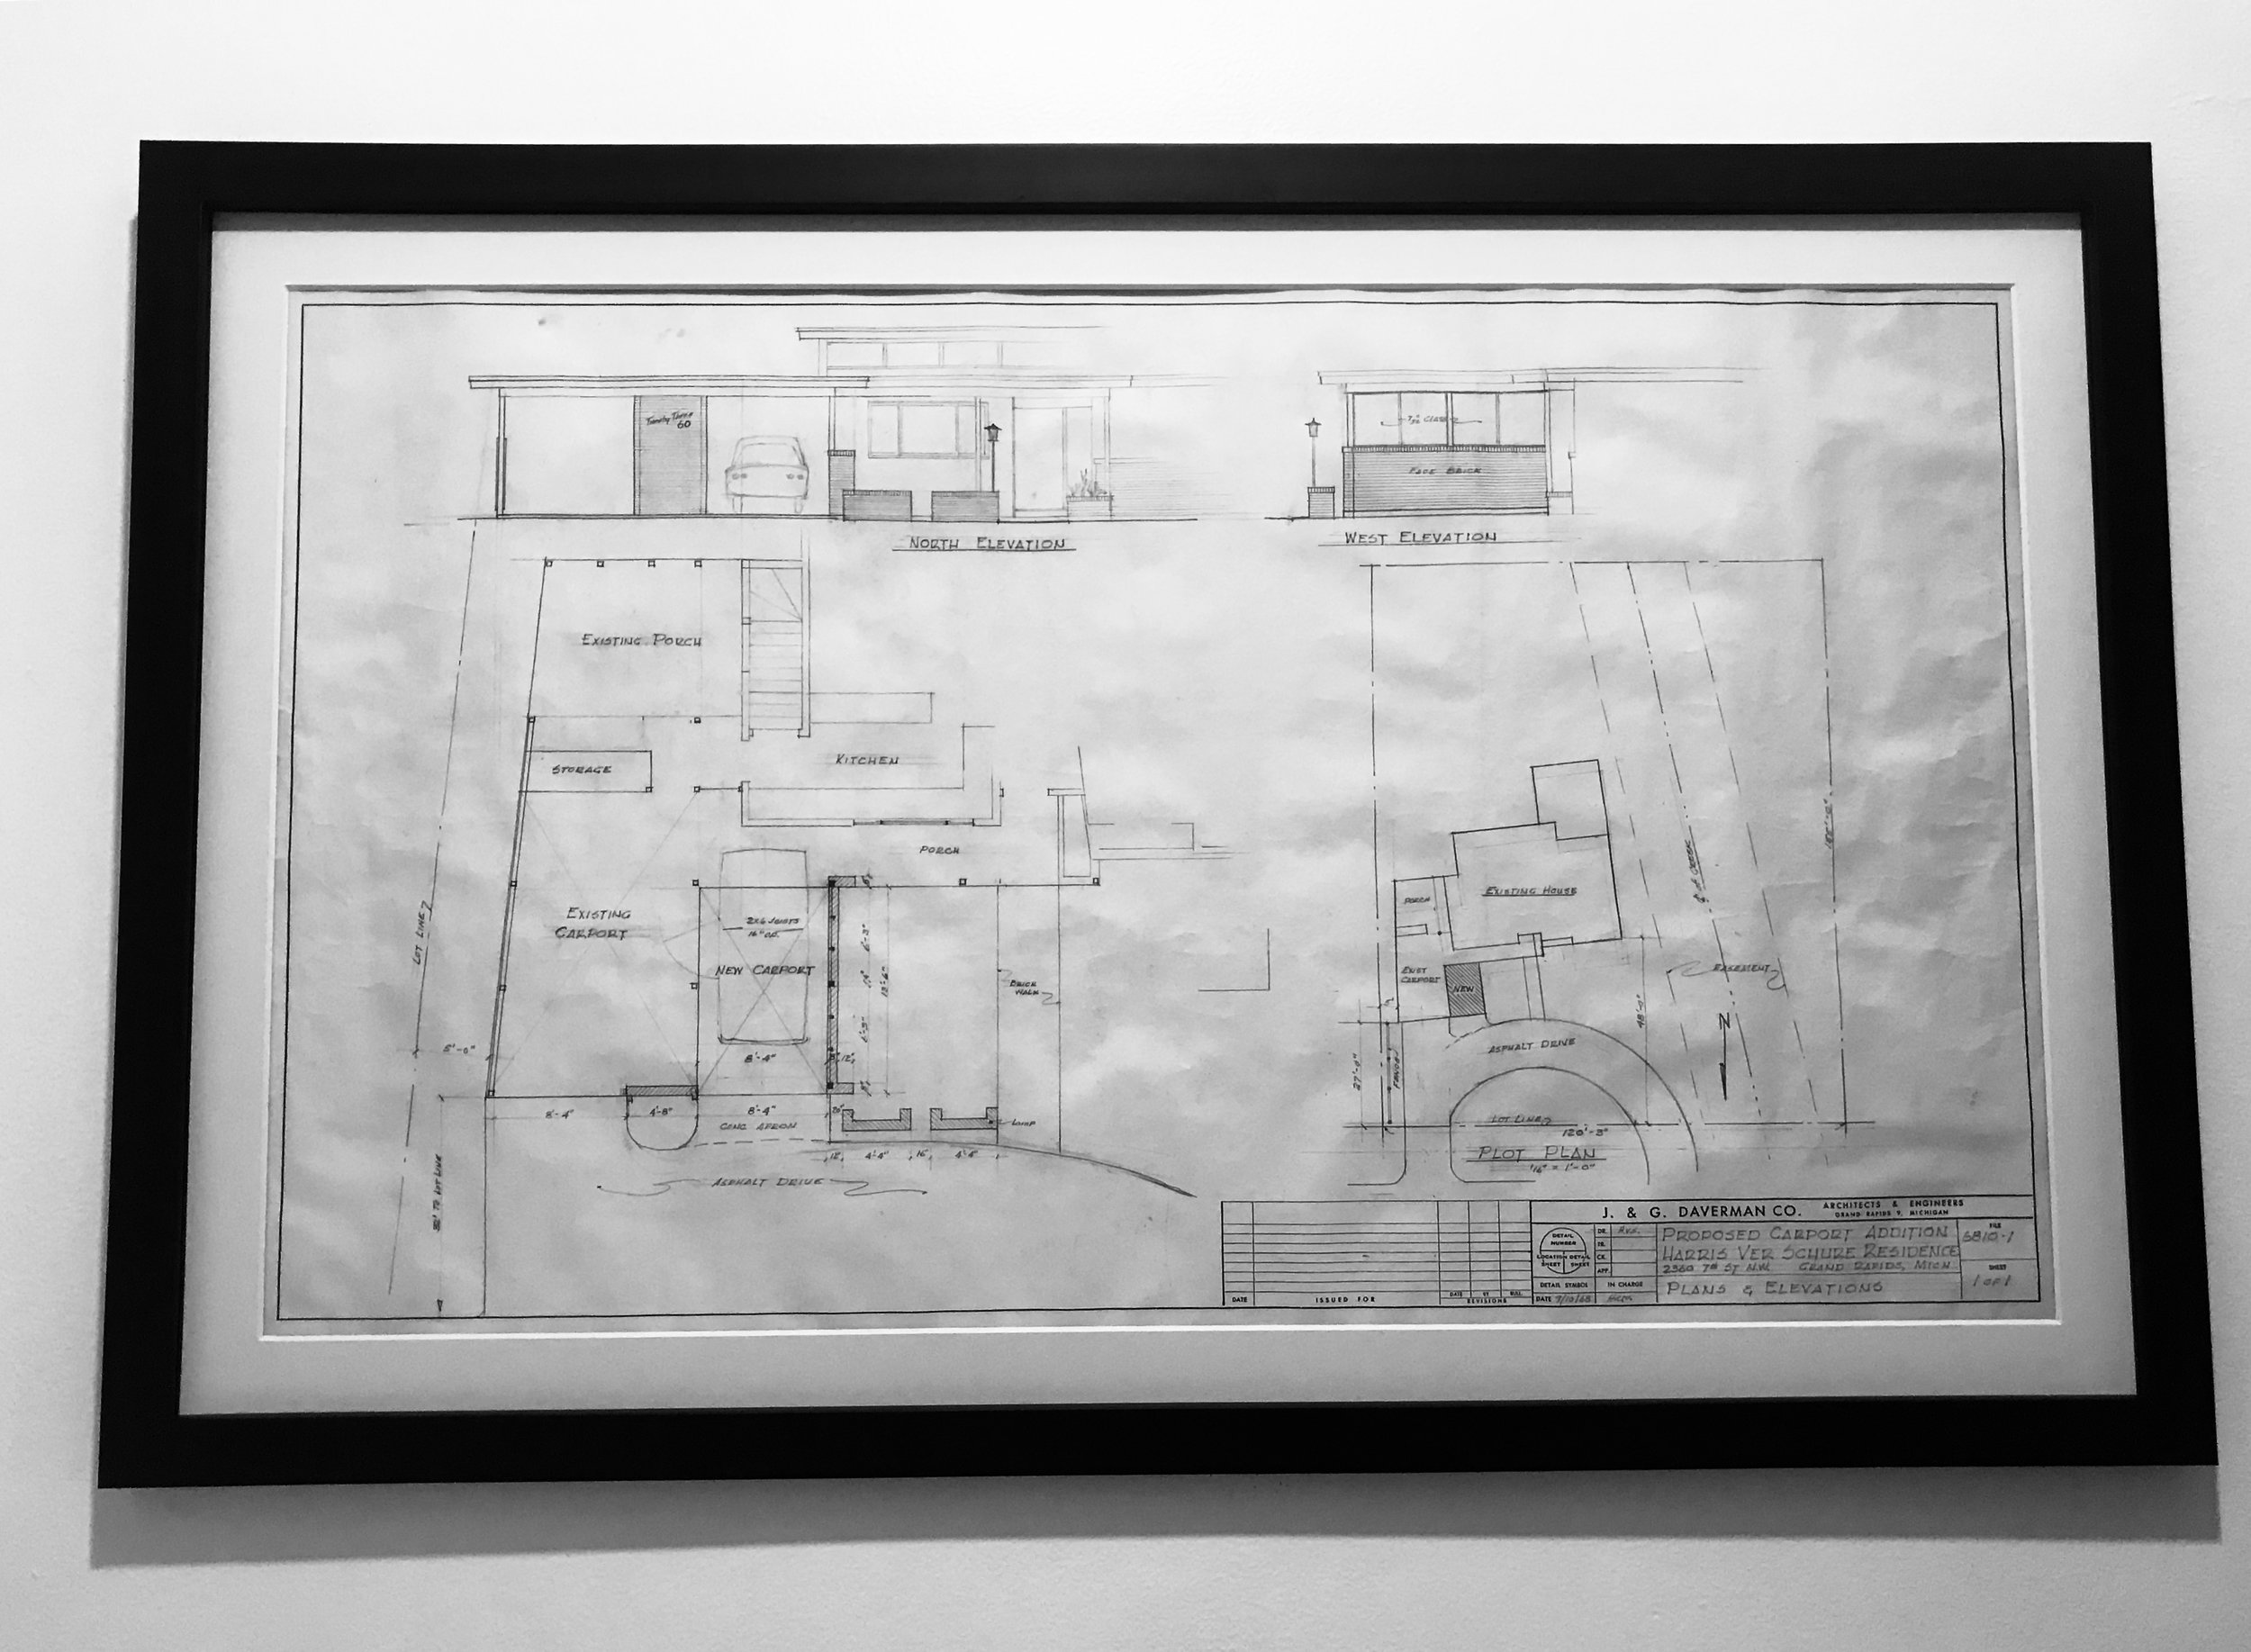 ORIGINAL ELEVATION DRAWING FOUND IN THE HOUSE